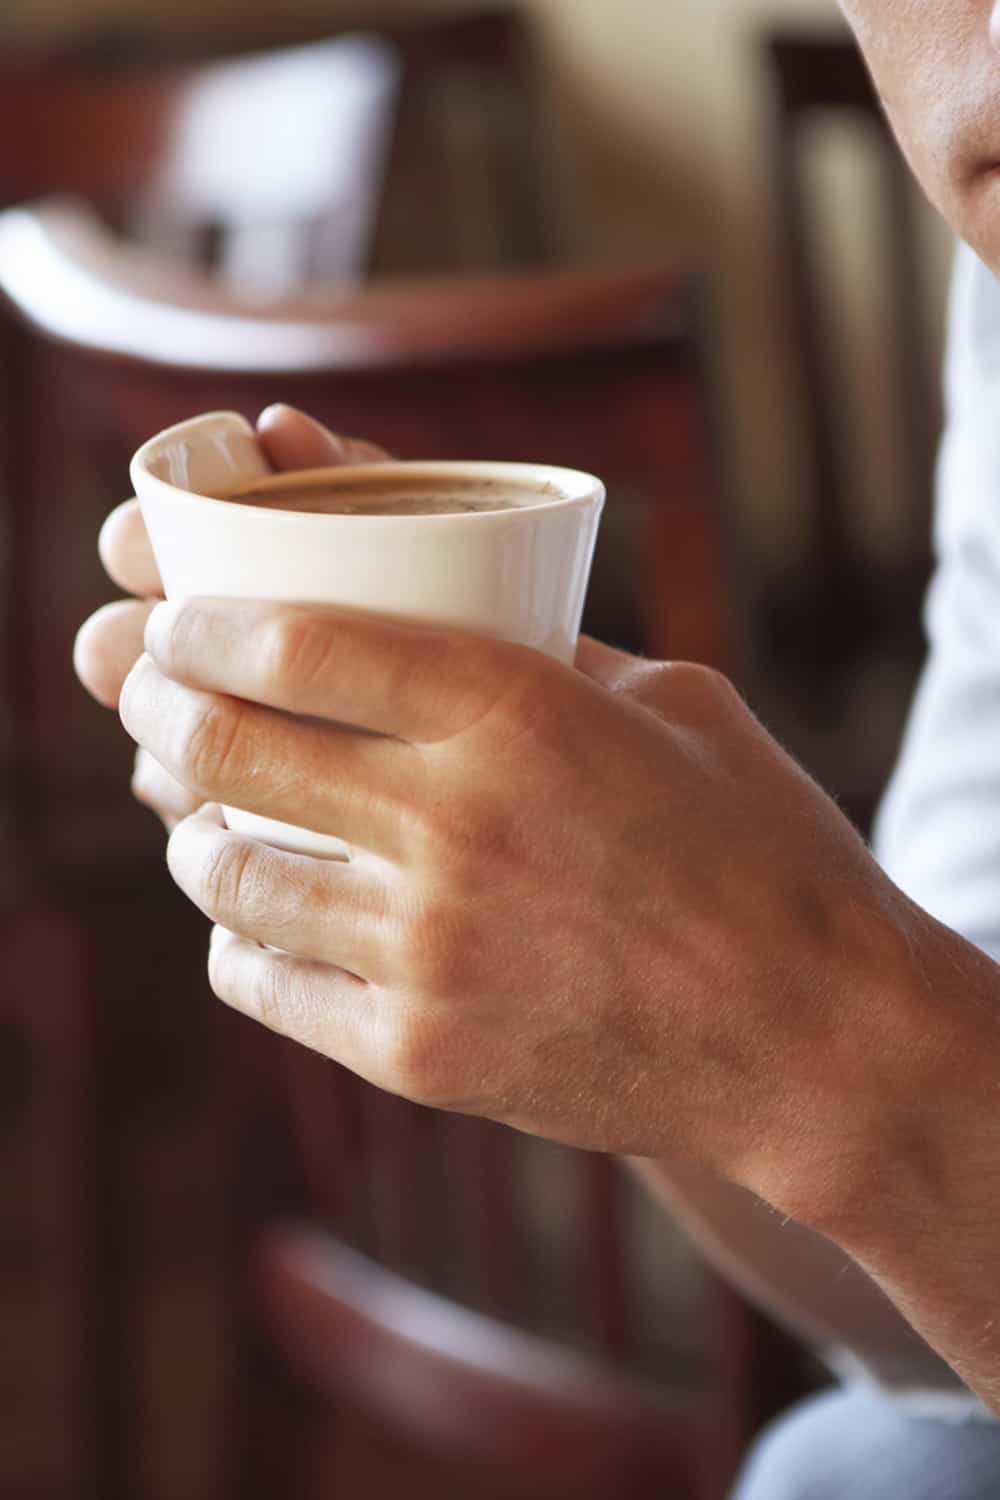 Can You Drink Coffee After Tooth Extraction?